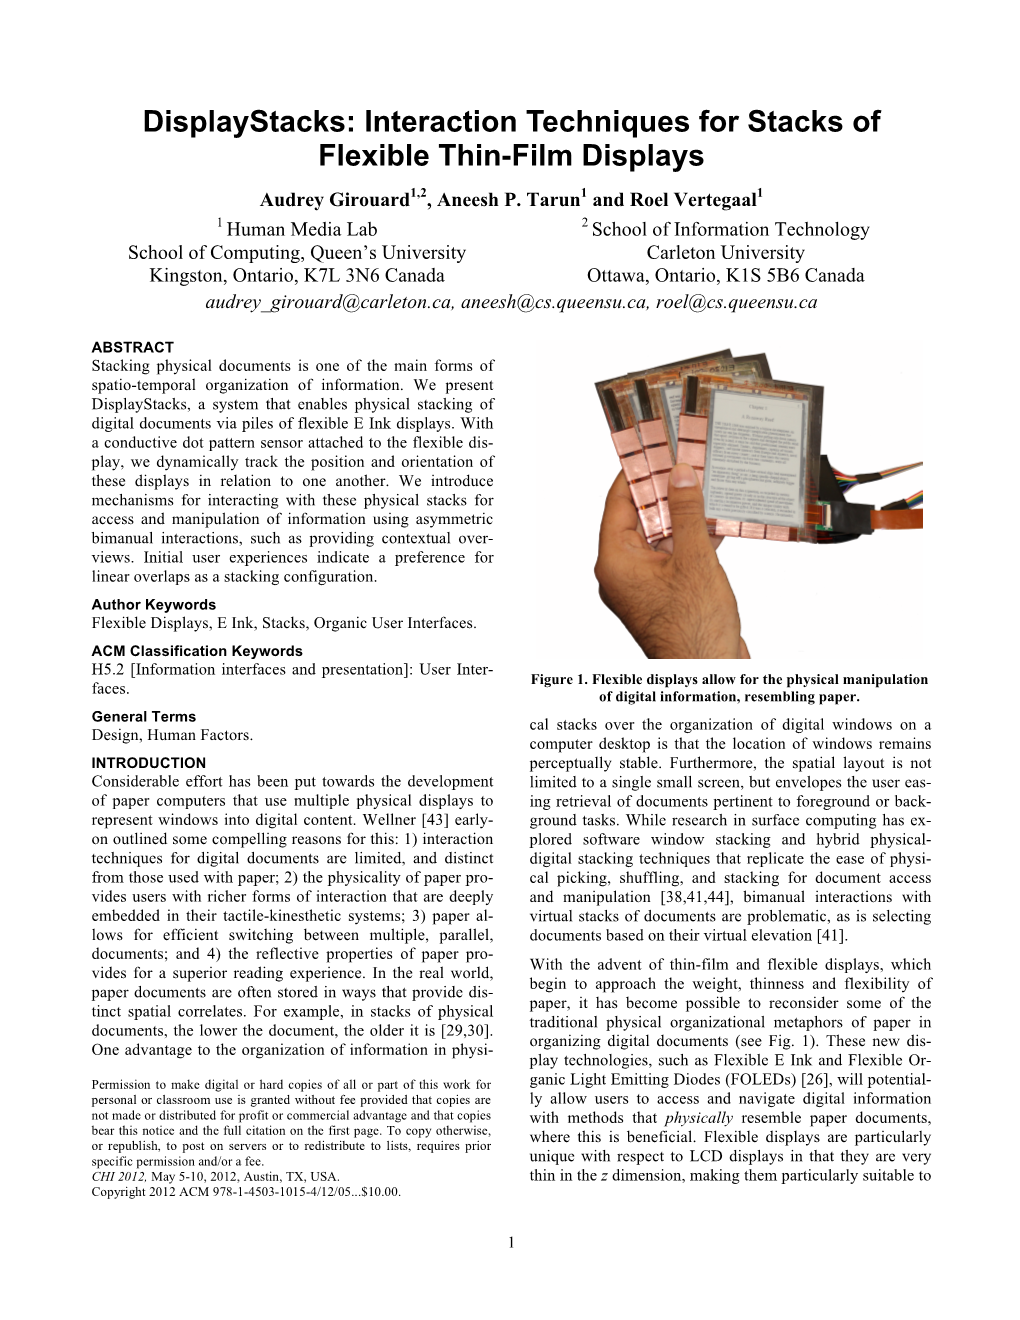 Displaystacks: Interaction Techniques for Stacks of Flexible Thin-Film Displays Audrey Girouard1,2, Aneesh P